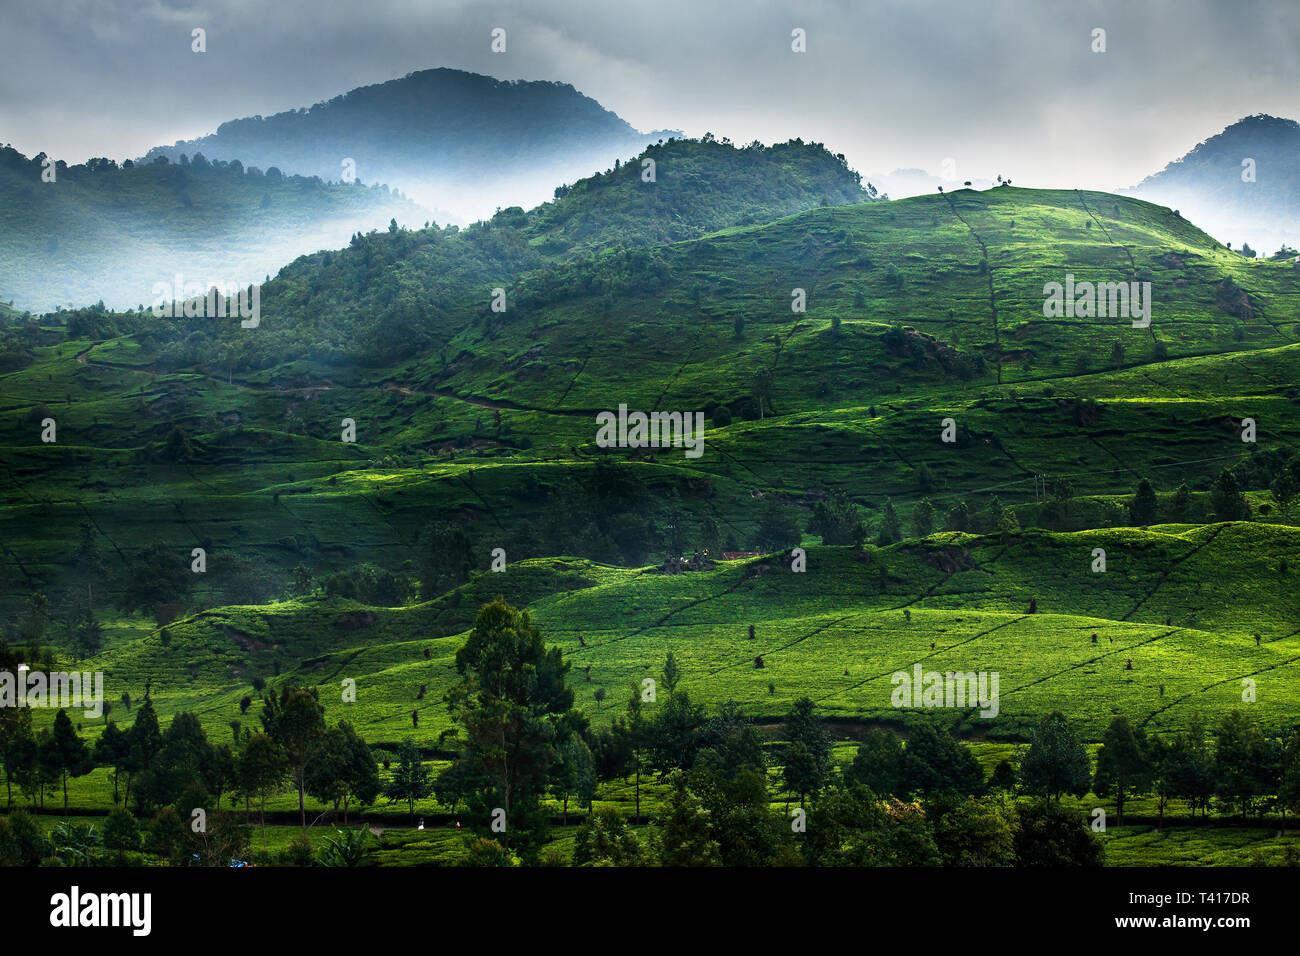 Tropical forest and mountain landscape, Indonesia Stock Photo